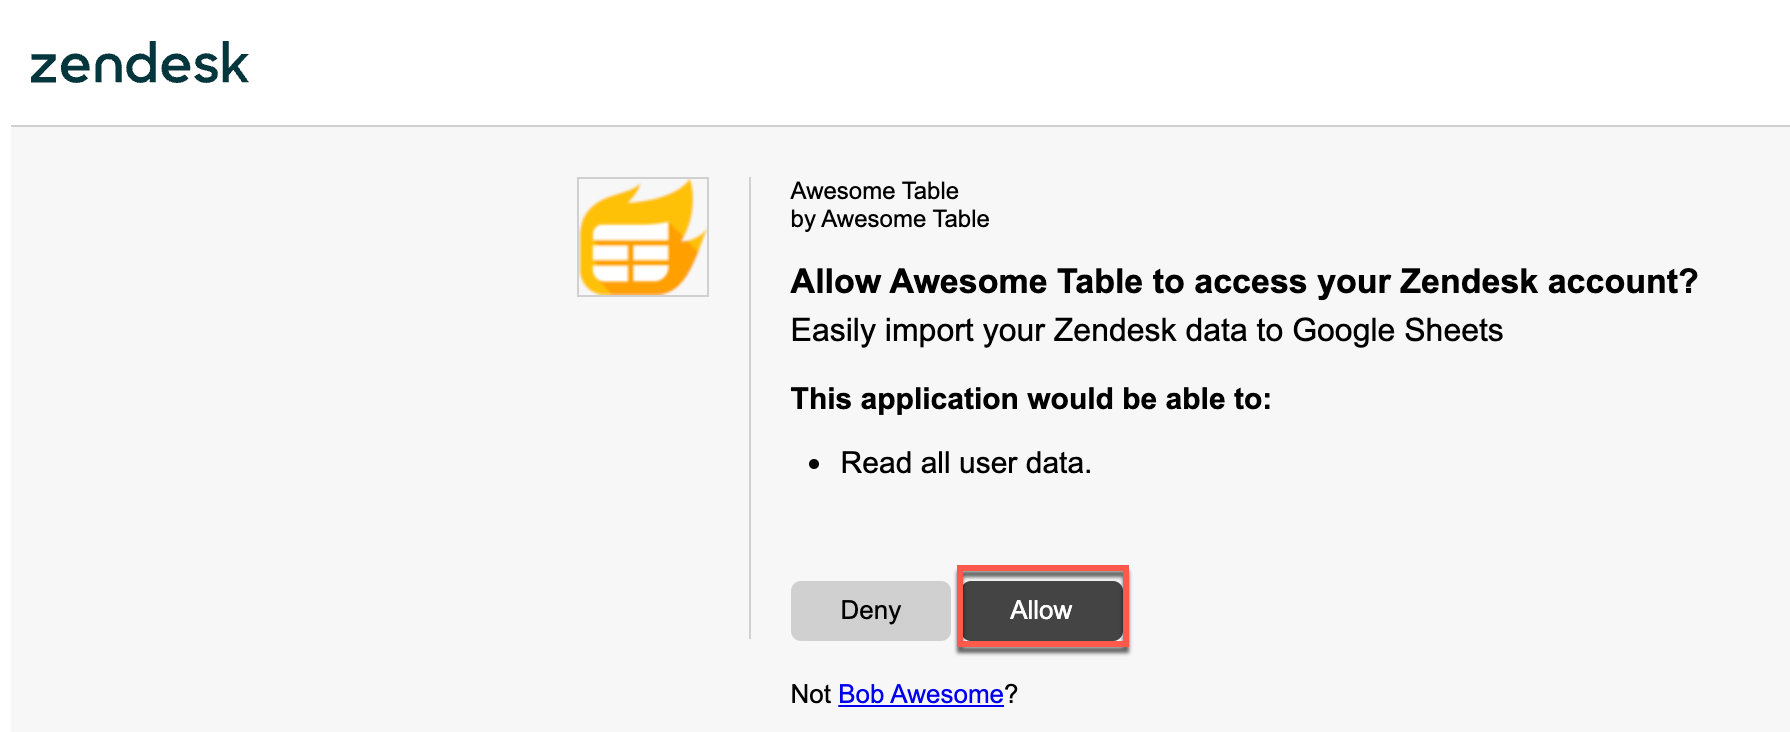 It allows Awesome Table Connectors to access your Zendesk account